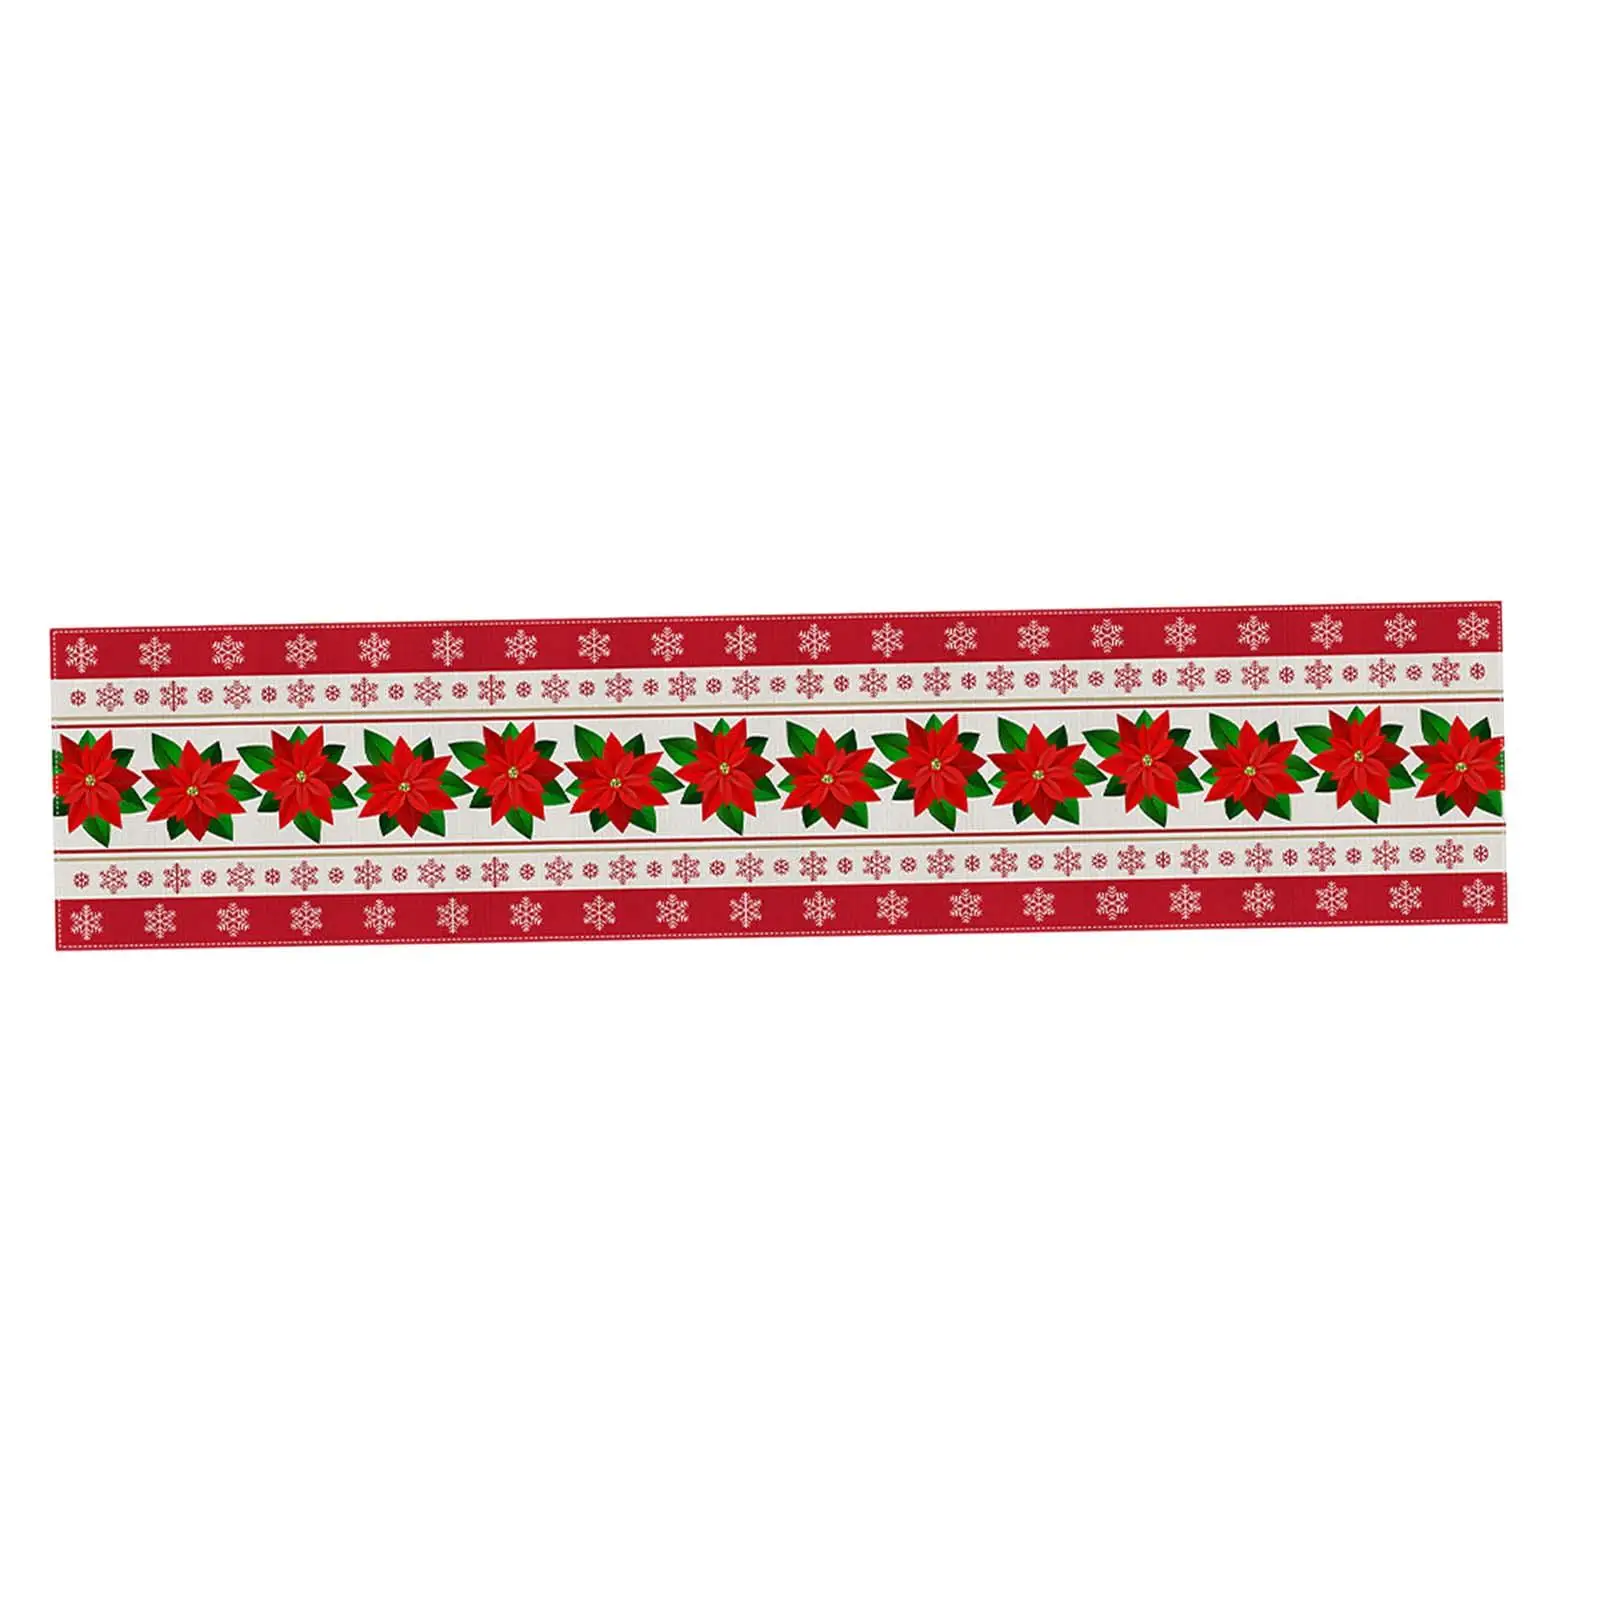 Christmas Table Runner Indoor Rustic 13 x 71 inch Christmas Decoration Tablecloth for Dining Table Dresser Desk Winter Farmhouse